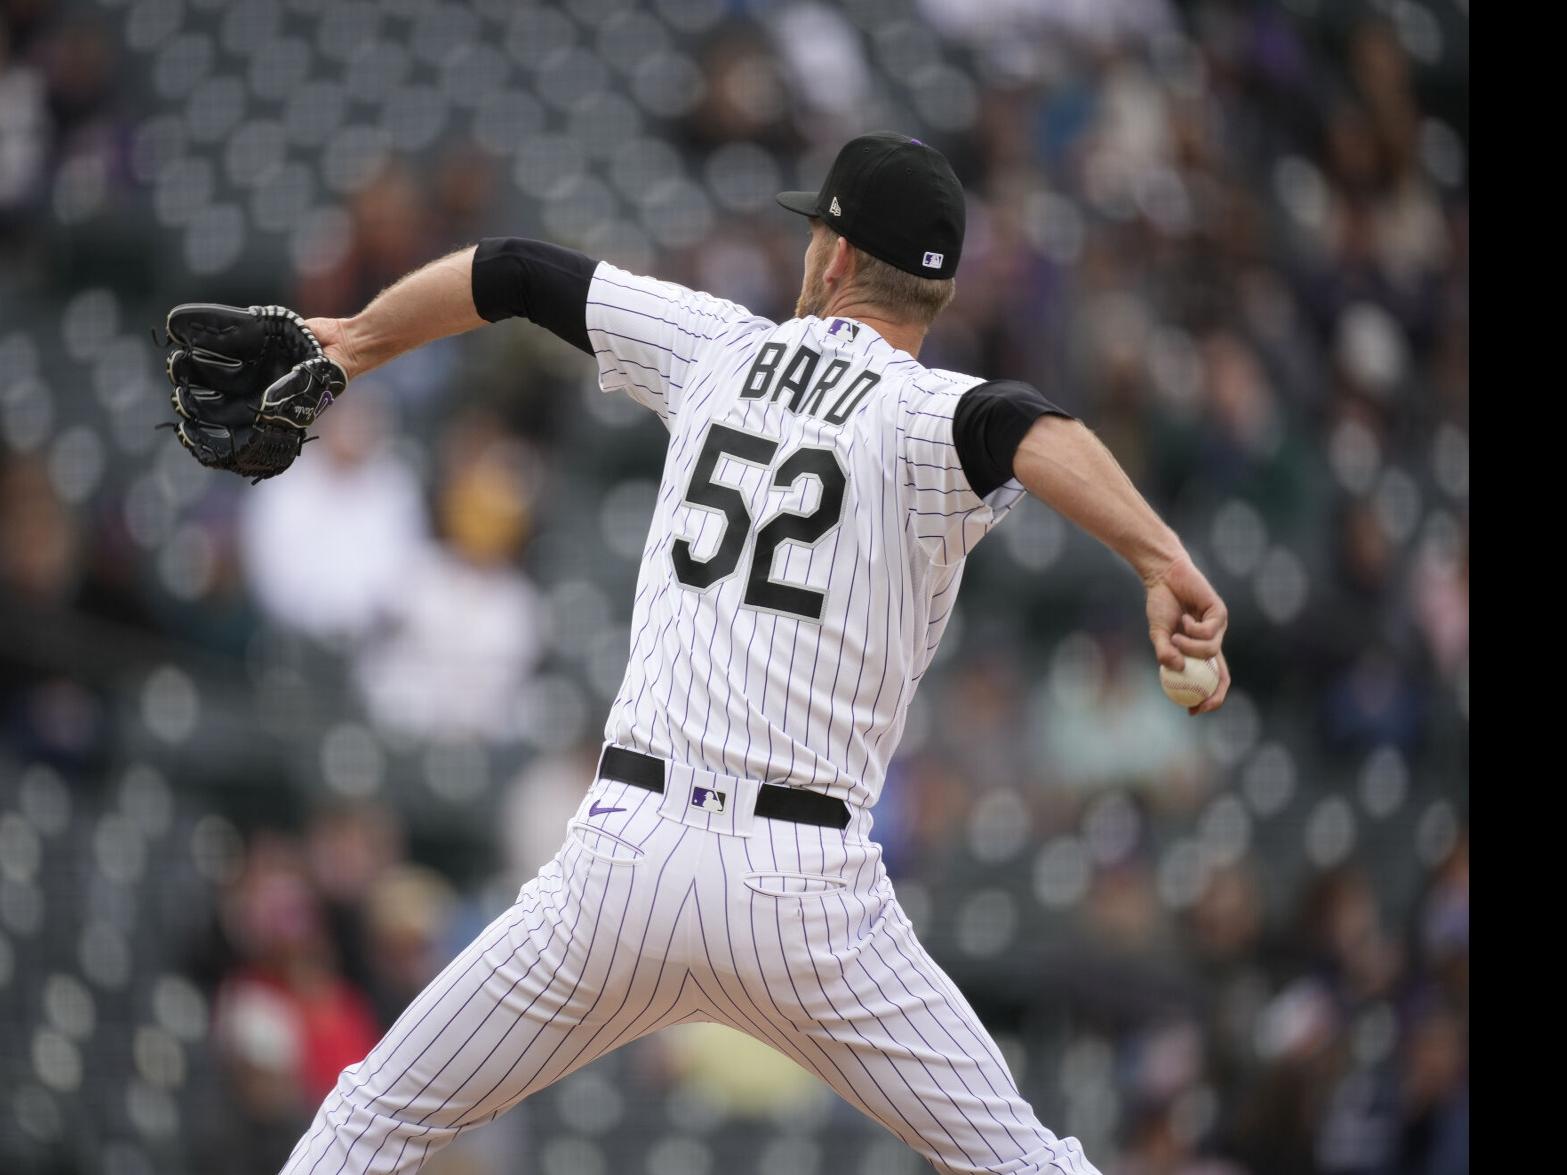 Daniel Bard, ex-Red Sox pitcher, placed on IR by Rockies due to anxiety